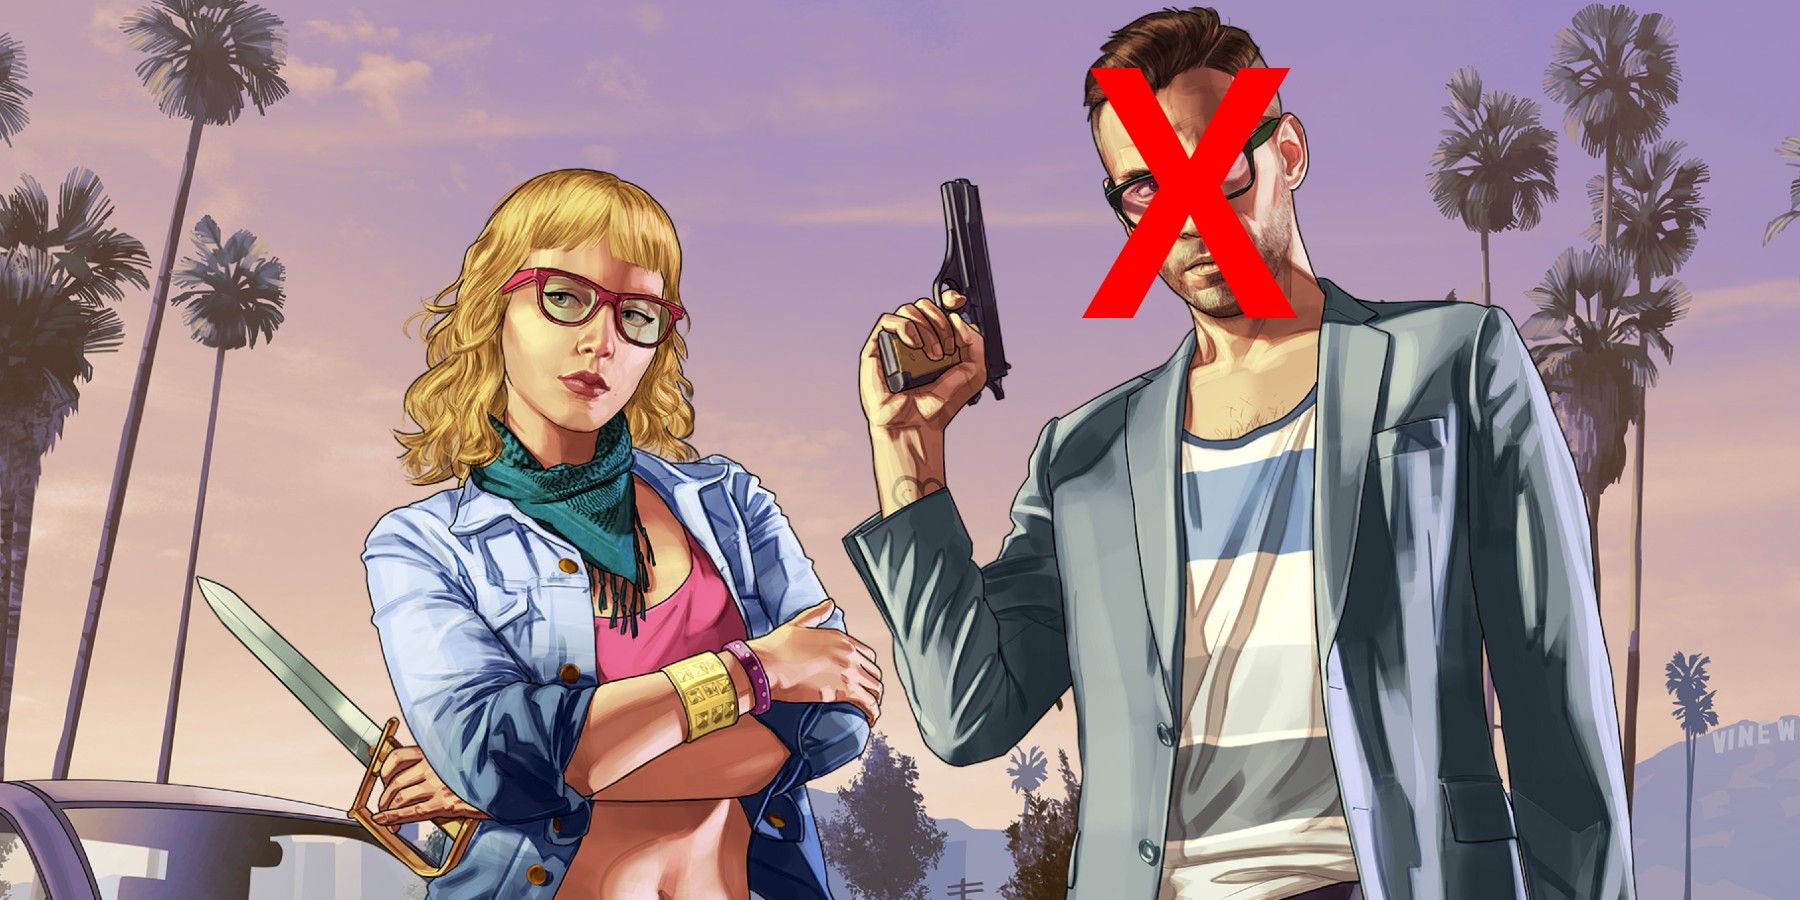 Grand Theft Auto promotional character art